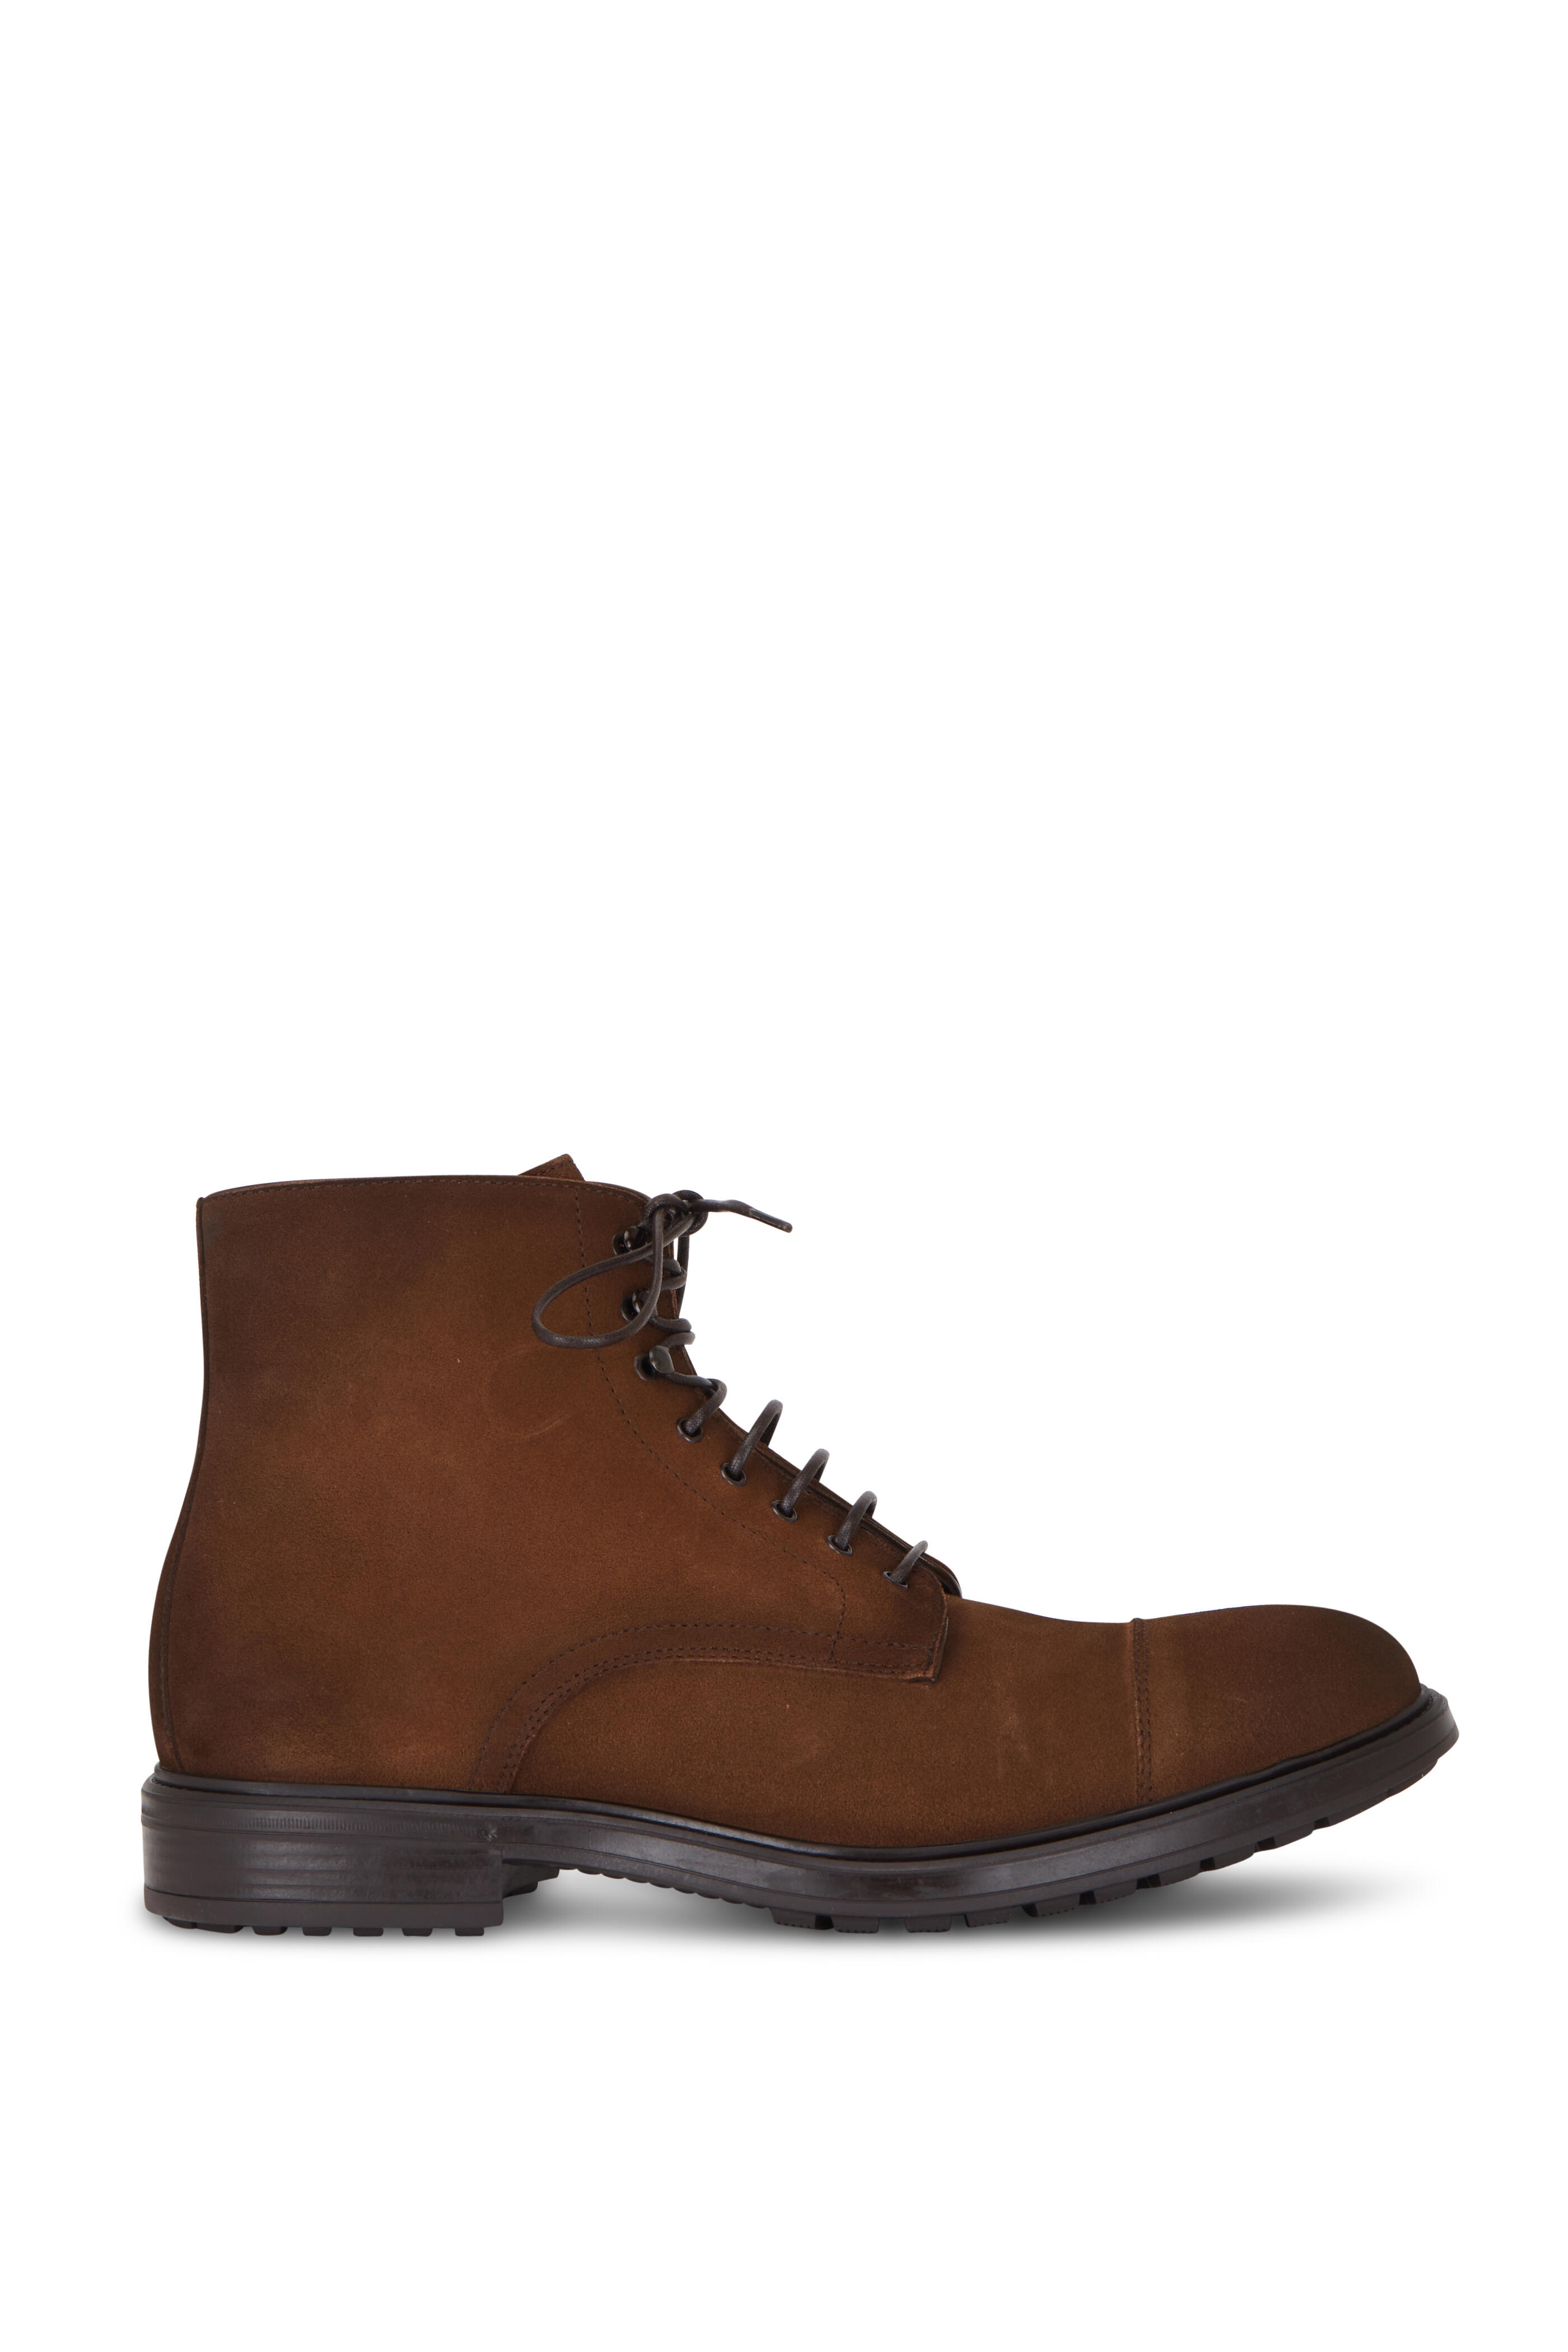 To Boot New York - Burkett Sigaro Suede Lace Up Boot